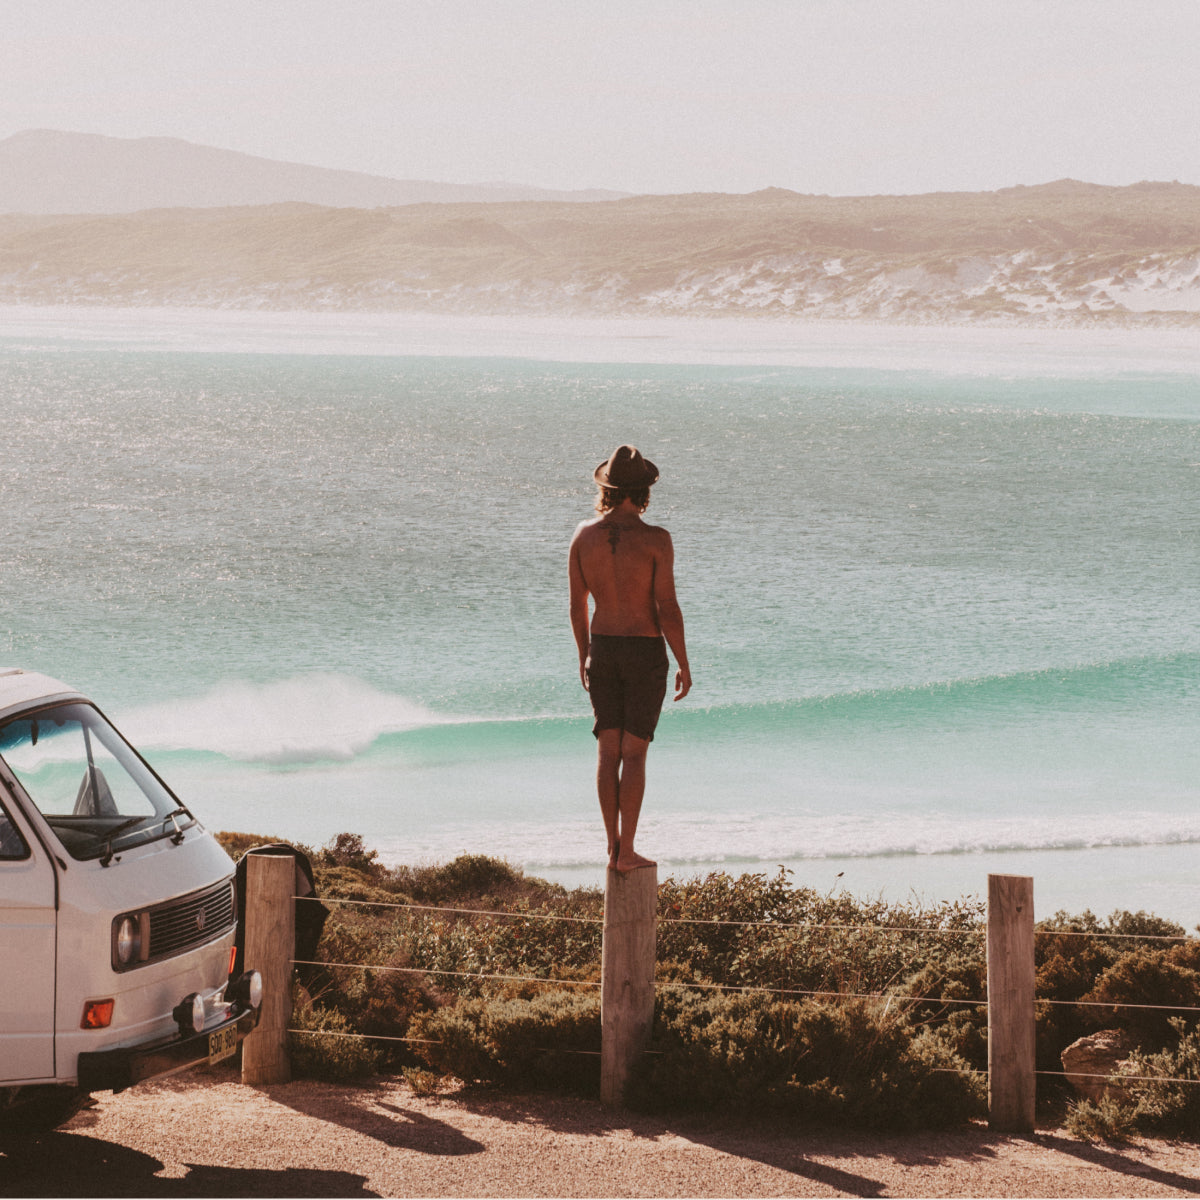 A man stands on top of a fence bollard next to his parked VW van, looking out at the ocean view